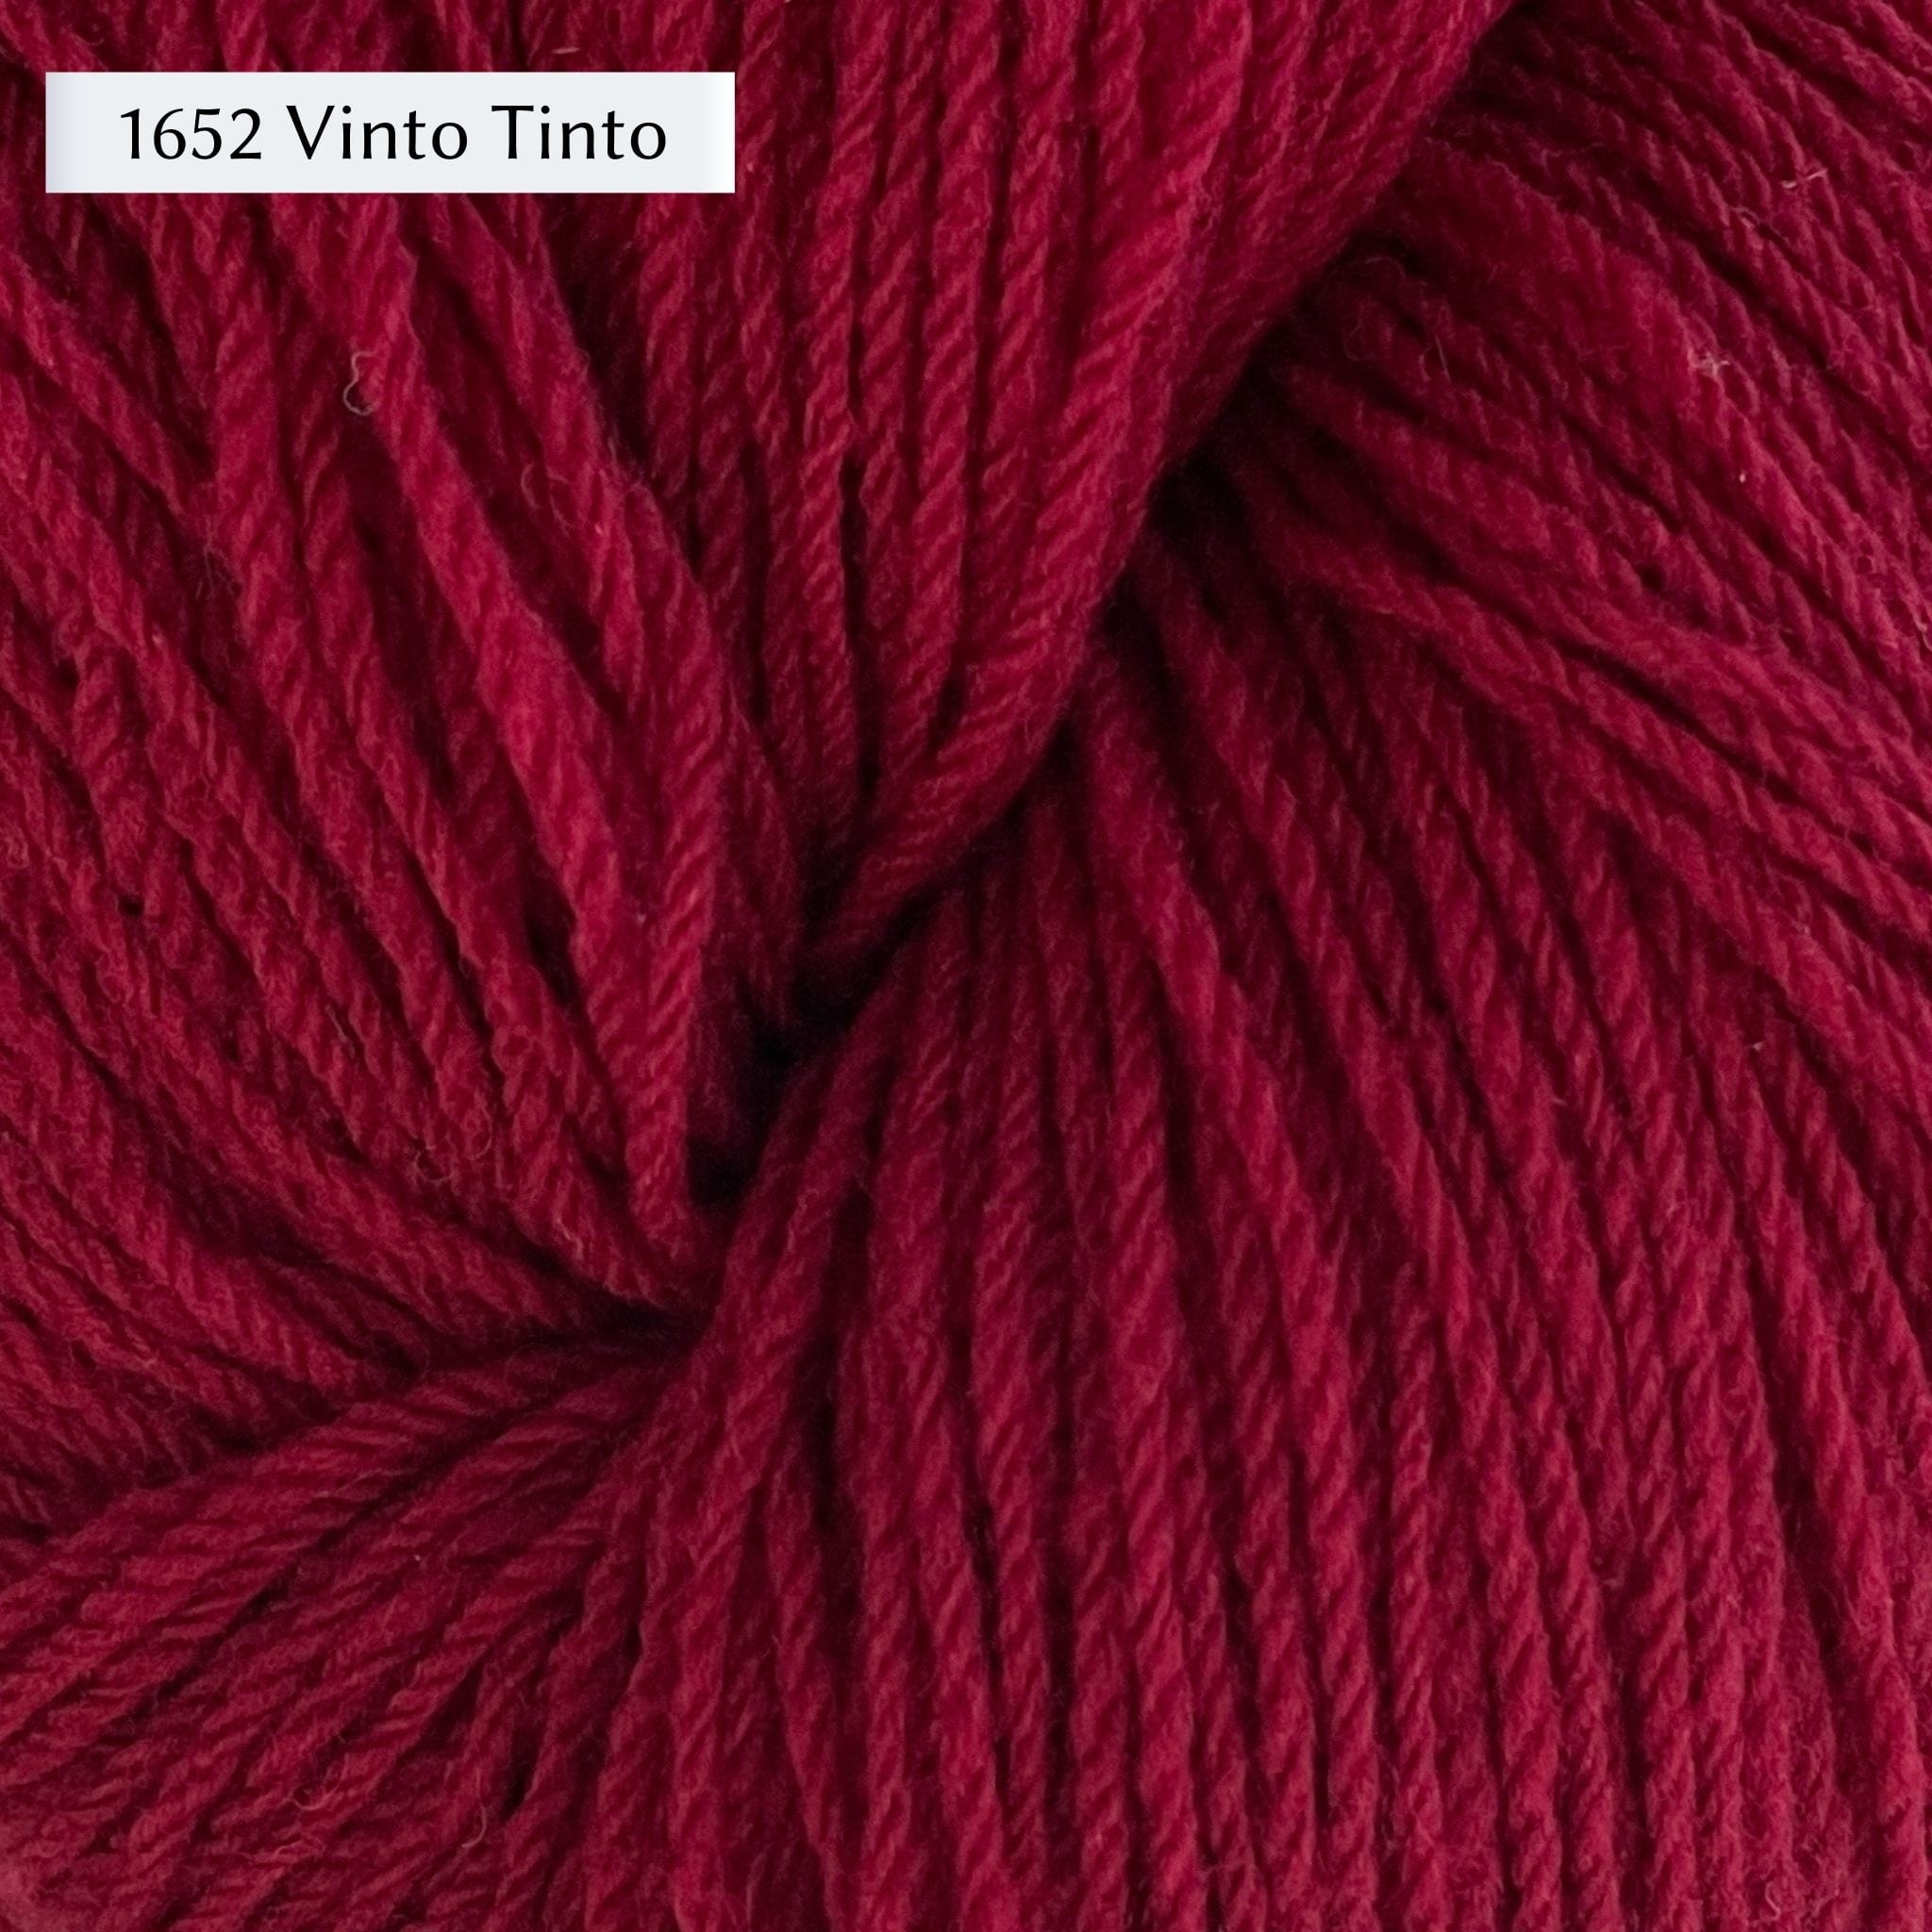 WoolDreamers Dehesa de Barrera, a fingering weight yarn, in color 1652 Vinto Tinto, a rich burgundy red